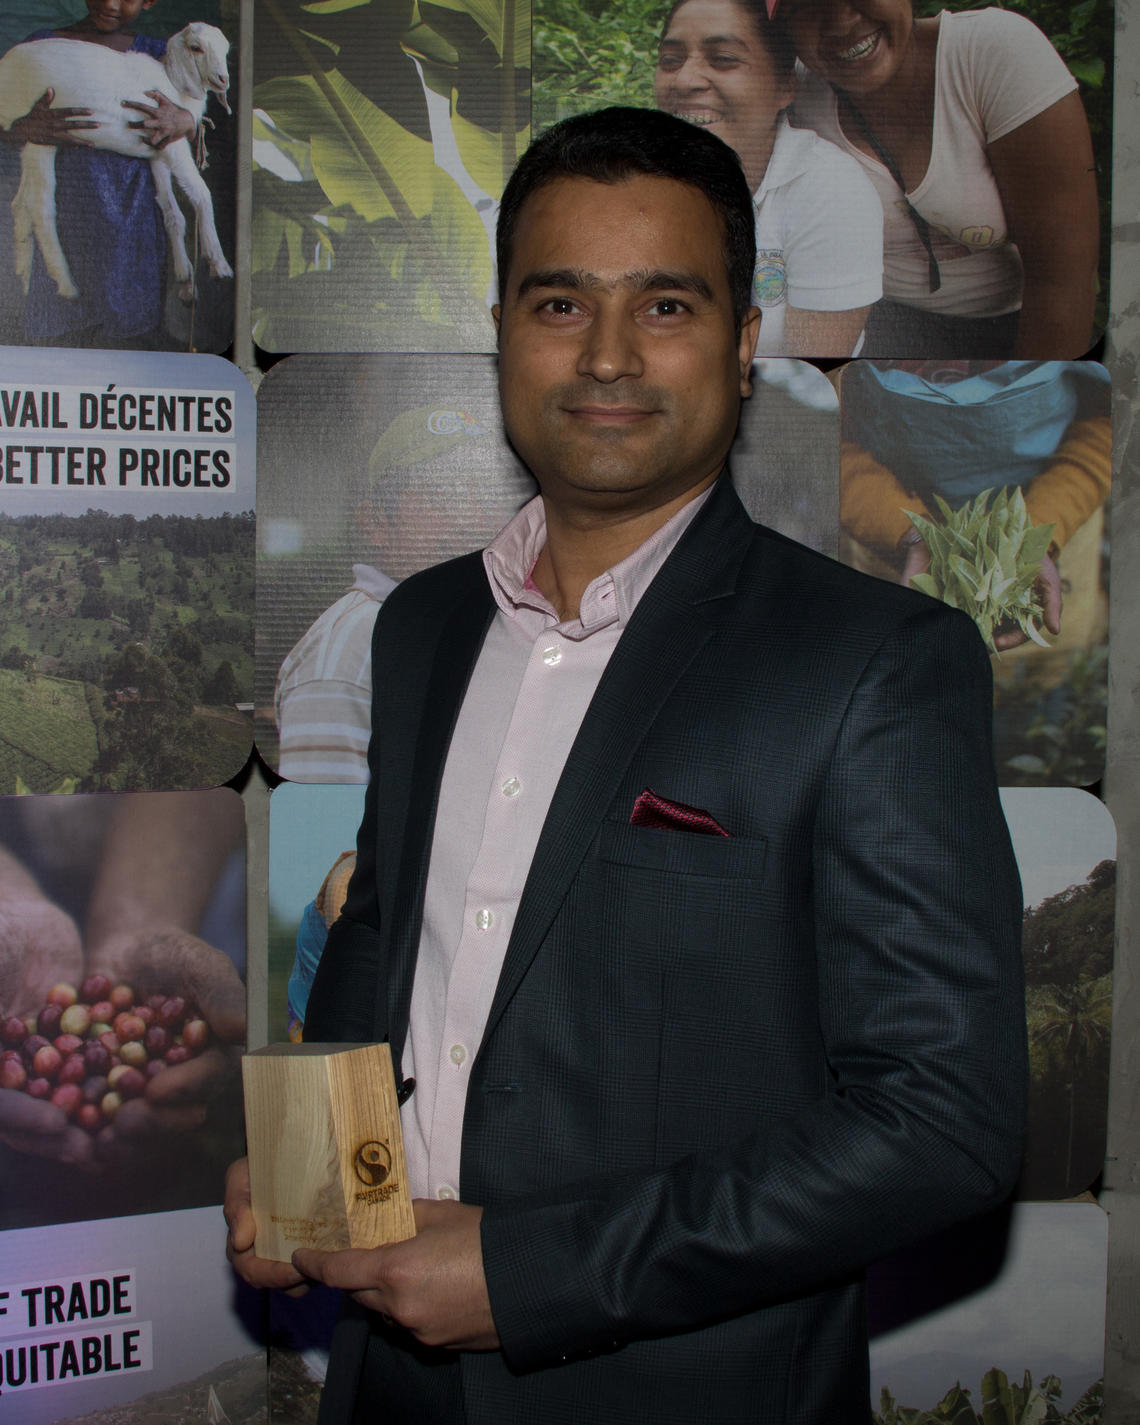 On March 2, 2019, the University of Calgary was named Campus of the Year by Fairtrade Canada at the Canadian Fairtrade Awards. Sanjay Khulbe, food and beverage manager, accepted the award on behalf of the university.